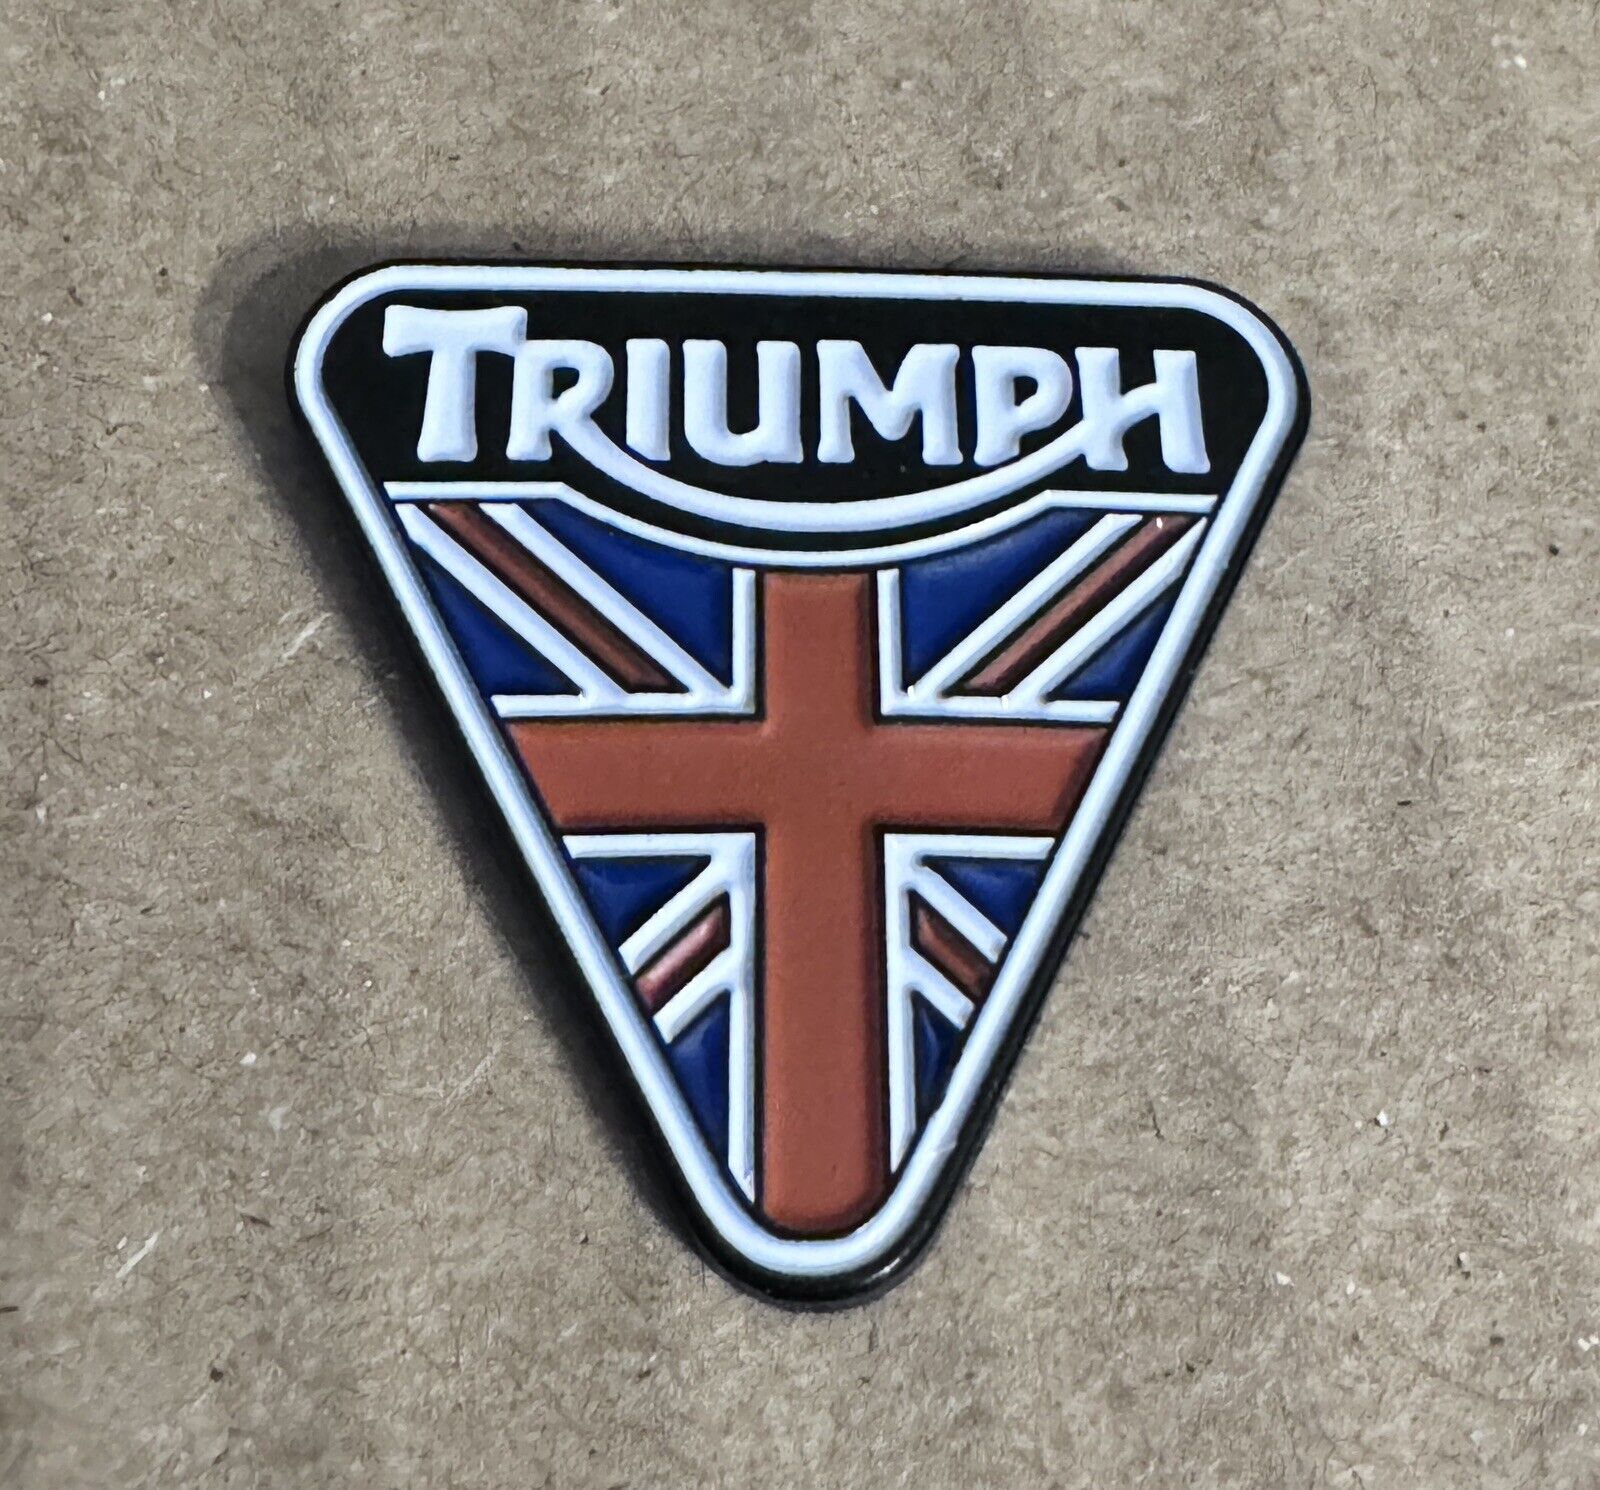 Triumph Motorcycle Lapel Pin - Bike - Cycle - Hat - Tie Tac - New